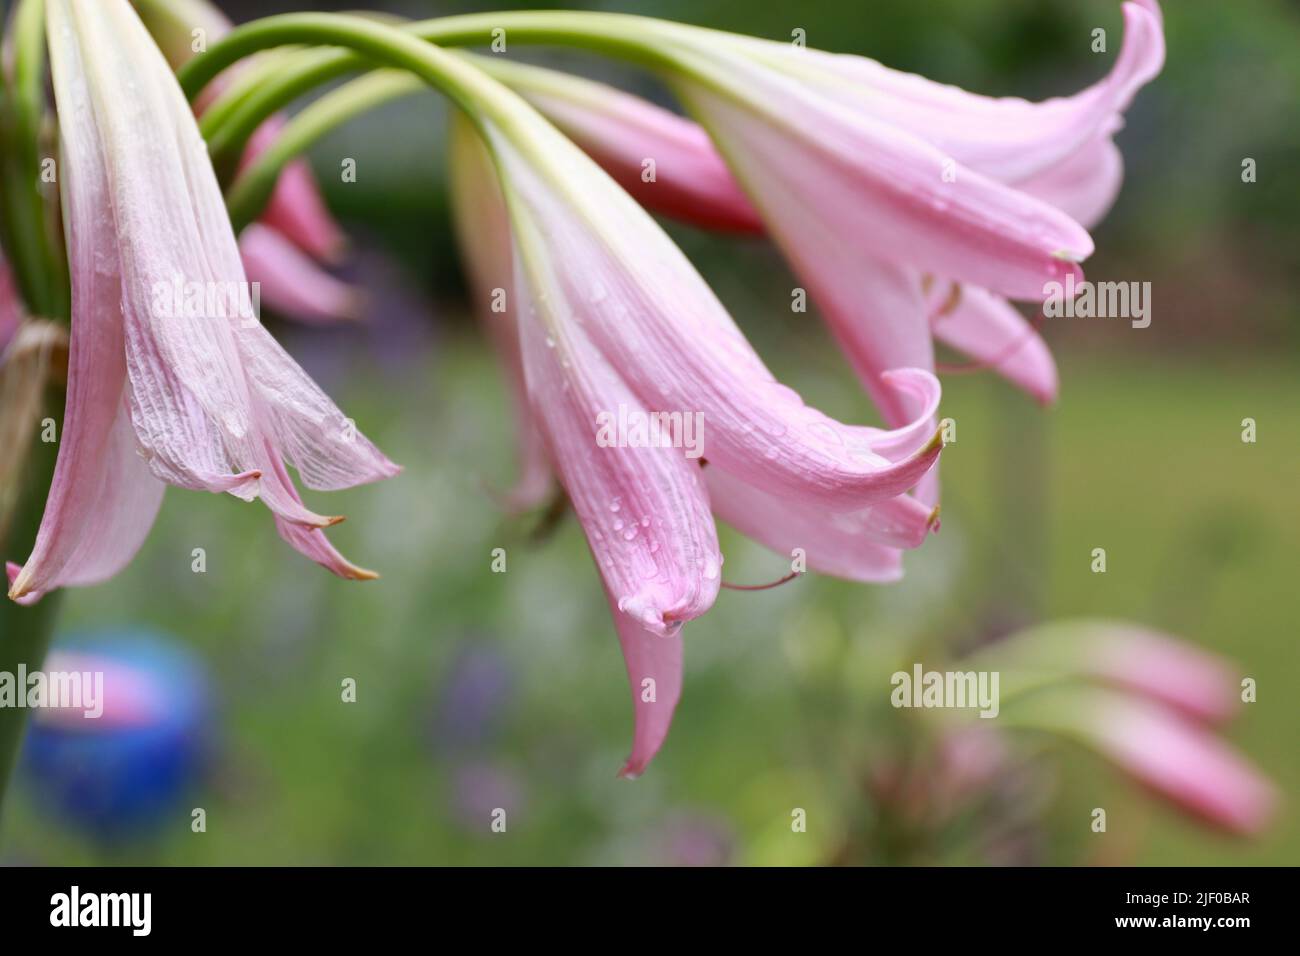 A closeup shot of pink crinum bulb flowers on blurred background Stock Photo